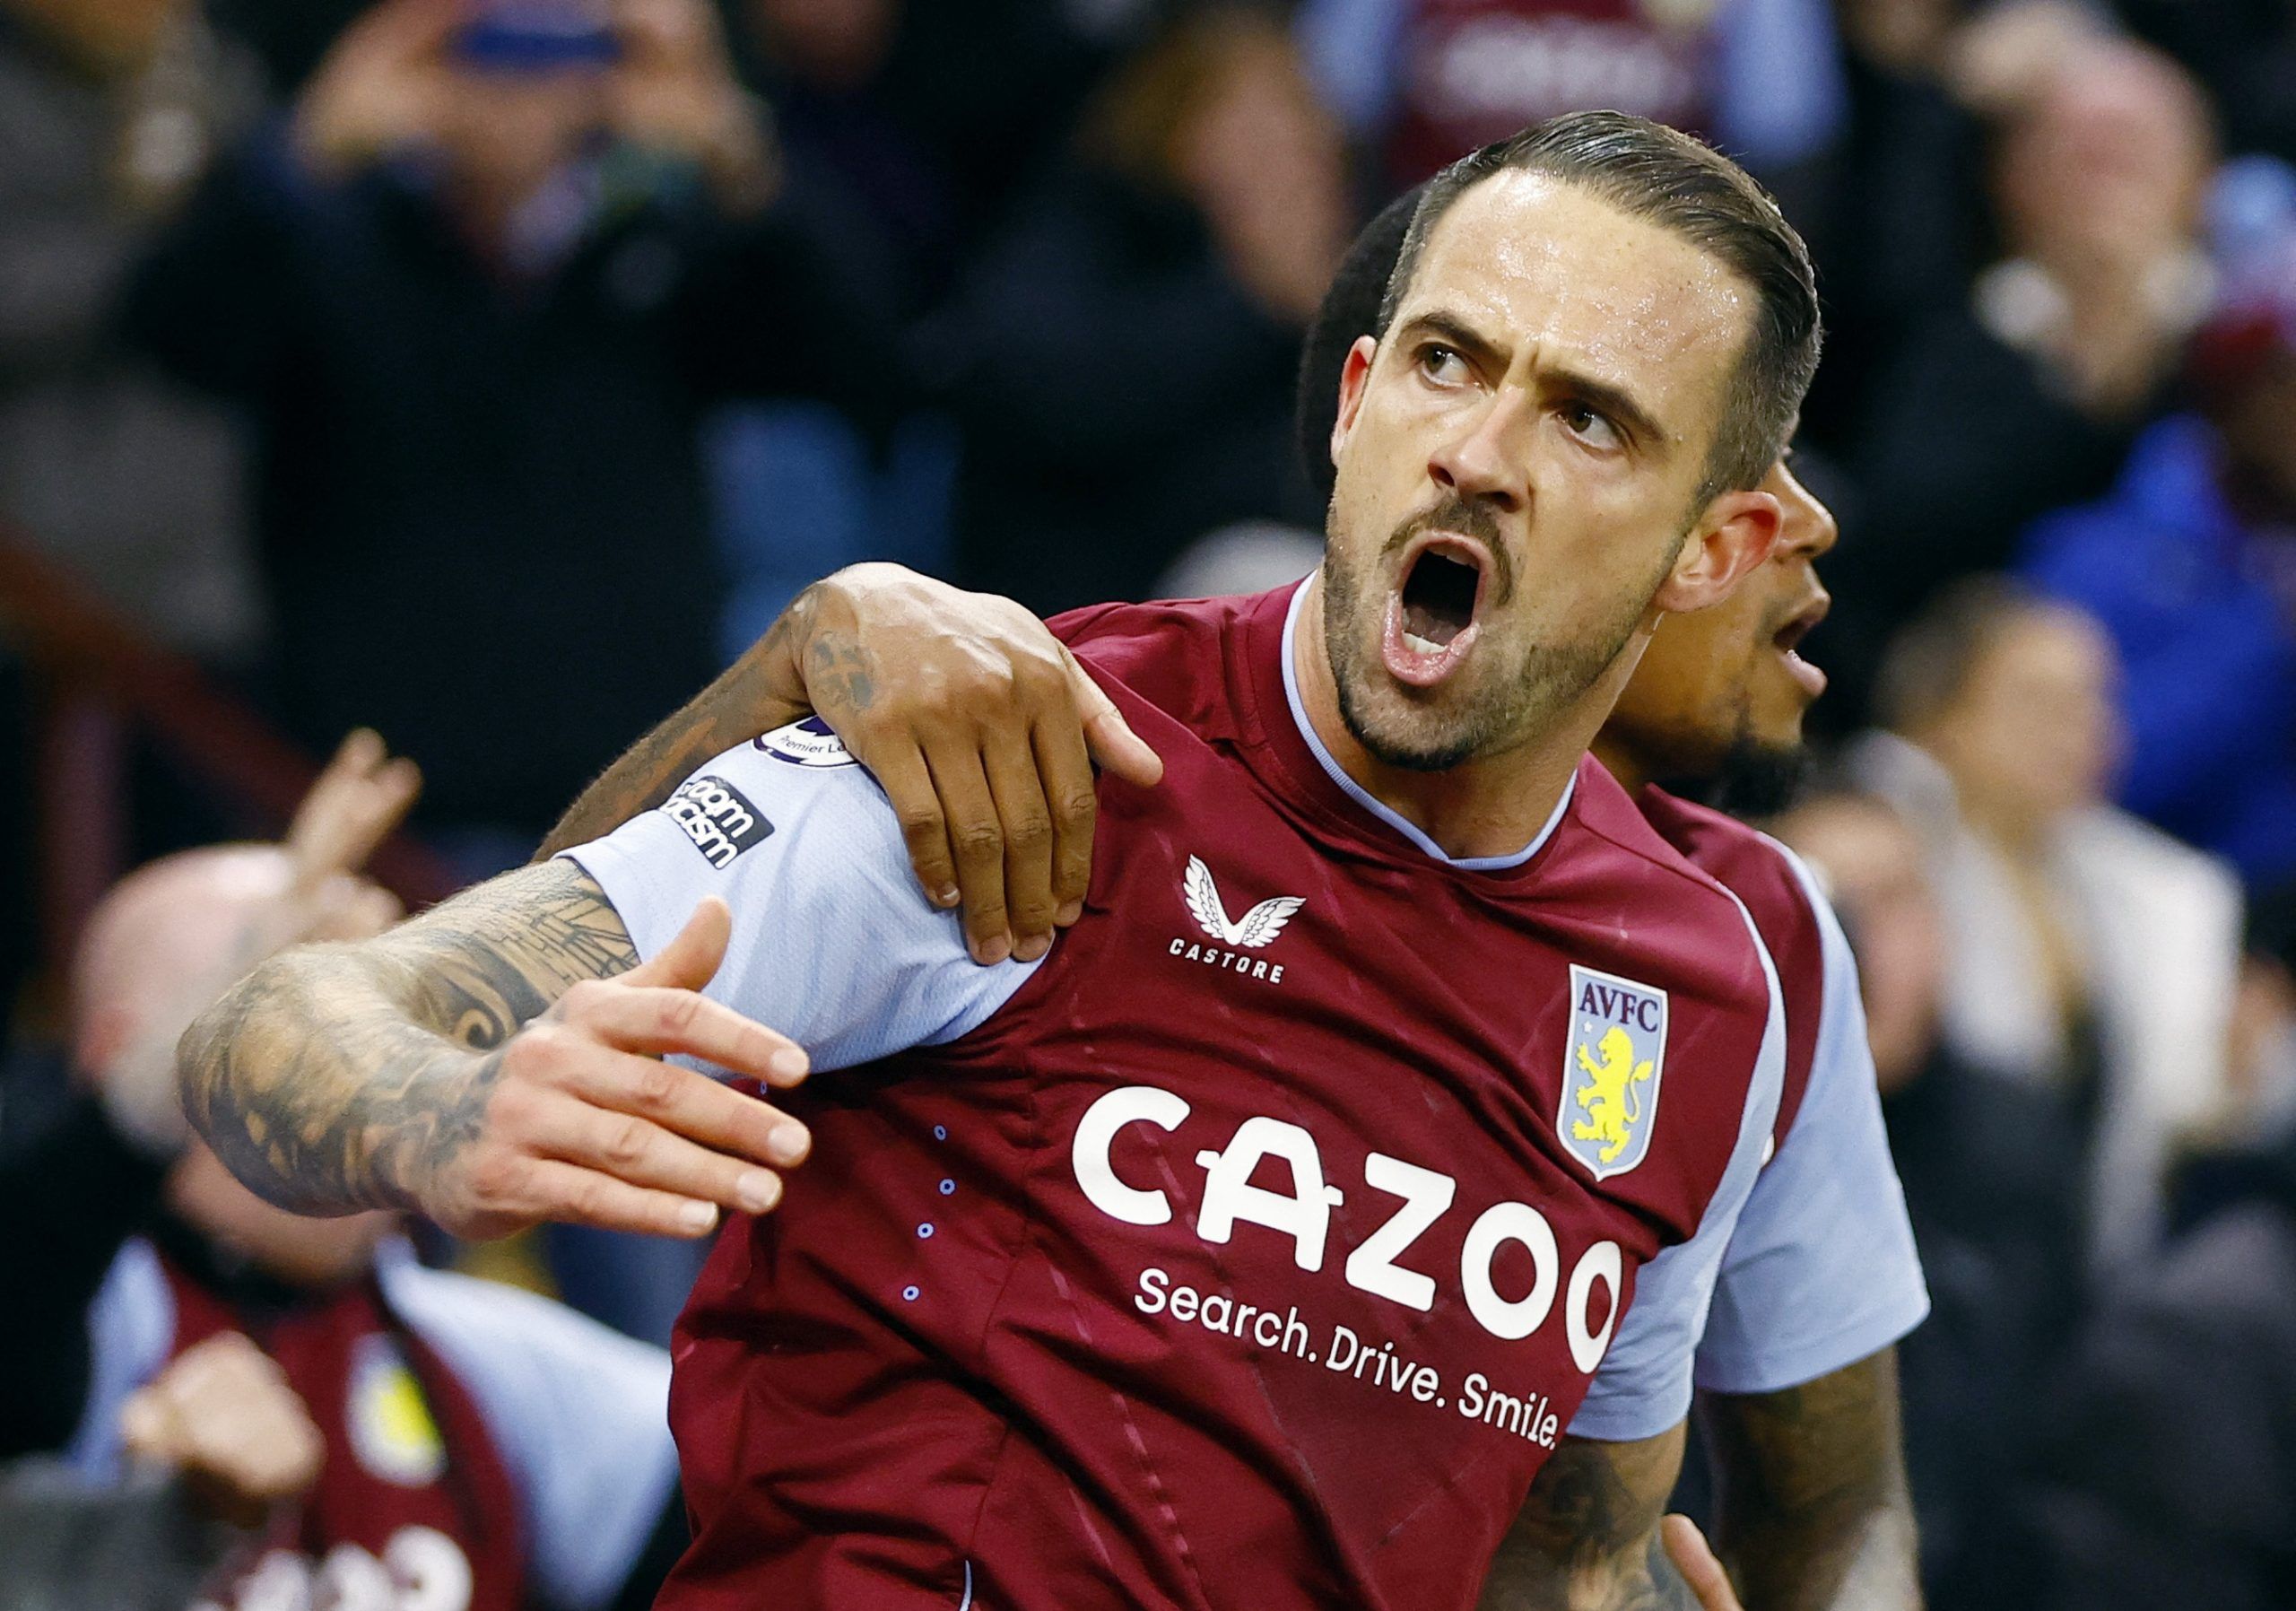 Soccer Football - Premier League - Aston Villa v Wolverhampton Wanderers - Villa Park, Birmingham, Britain - January 4, 2023 Aston Villa's Danny Ings celebrates scoring their first goal with Leon Bailey Action Images via Reuters/Peter Cziborra EDITORIAL USE ONLY. No use with unauthorized audio, video, data, fixture lists, club/league logos or 'live' services. Online in-match use limited to 75 images, no video emulation. No use in betting, games or single club /league/player publications.  Please